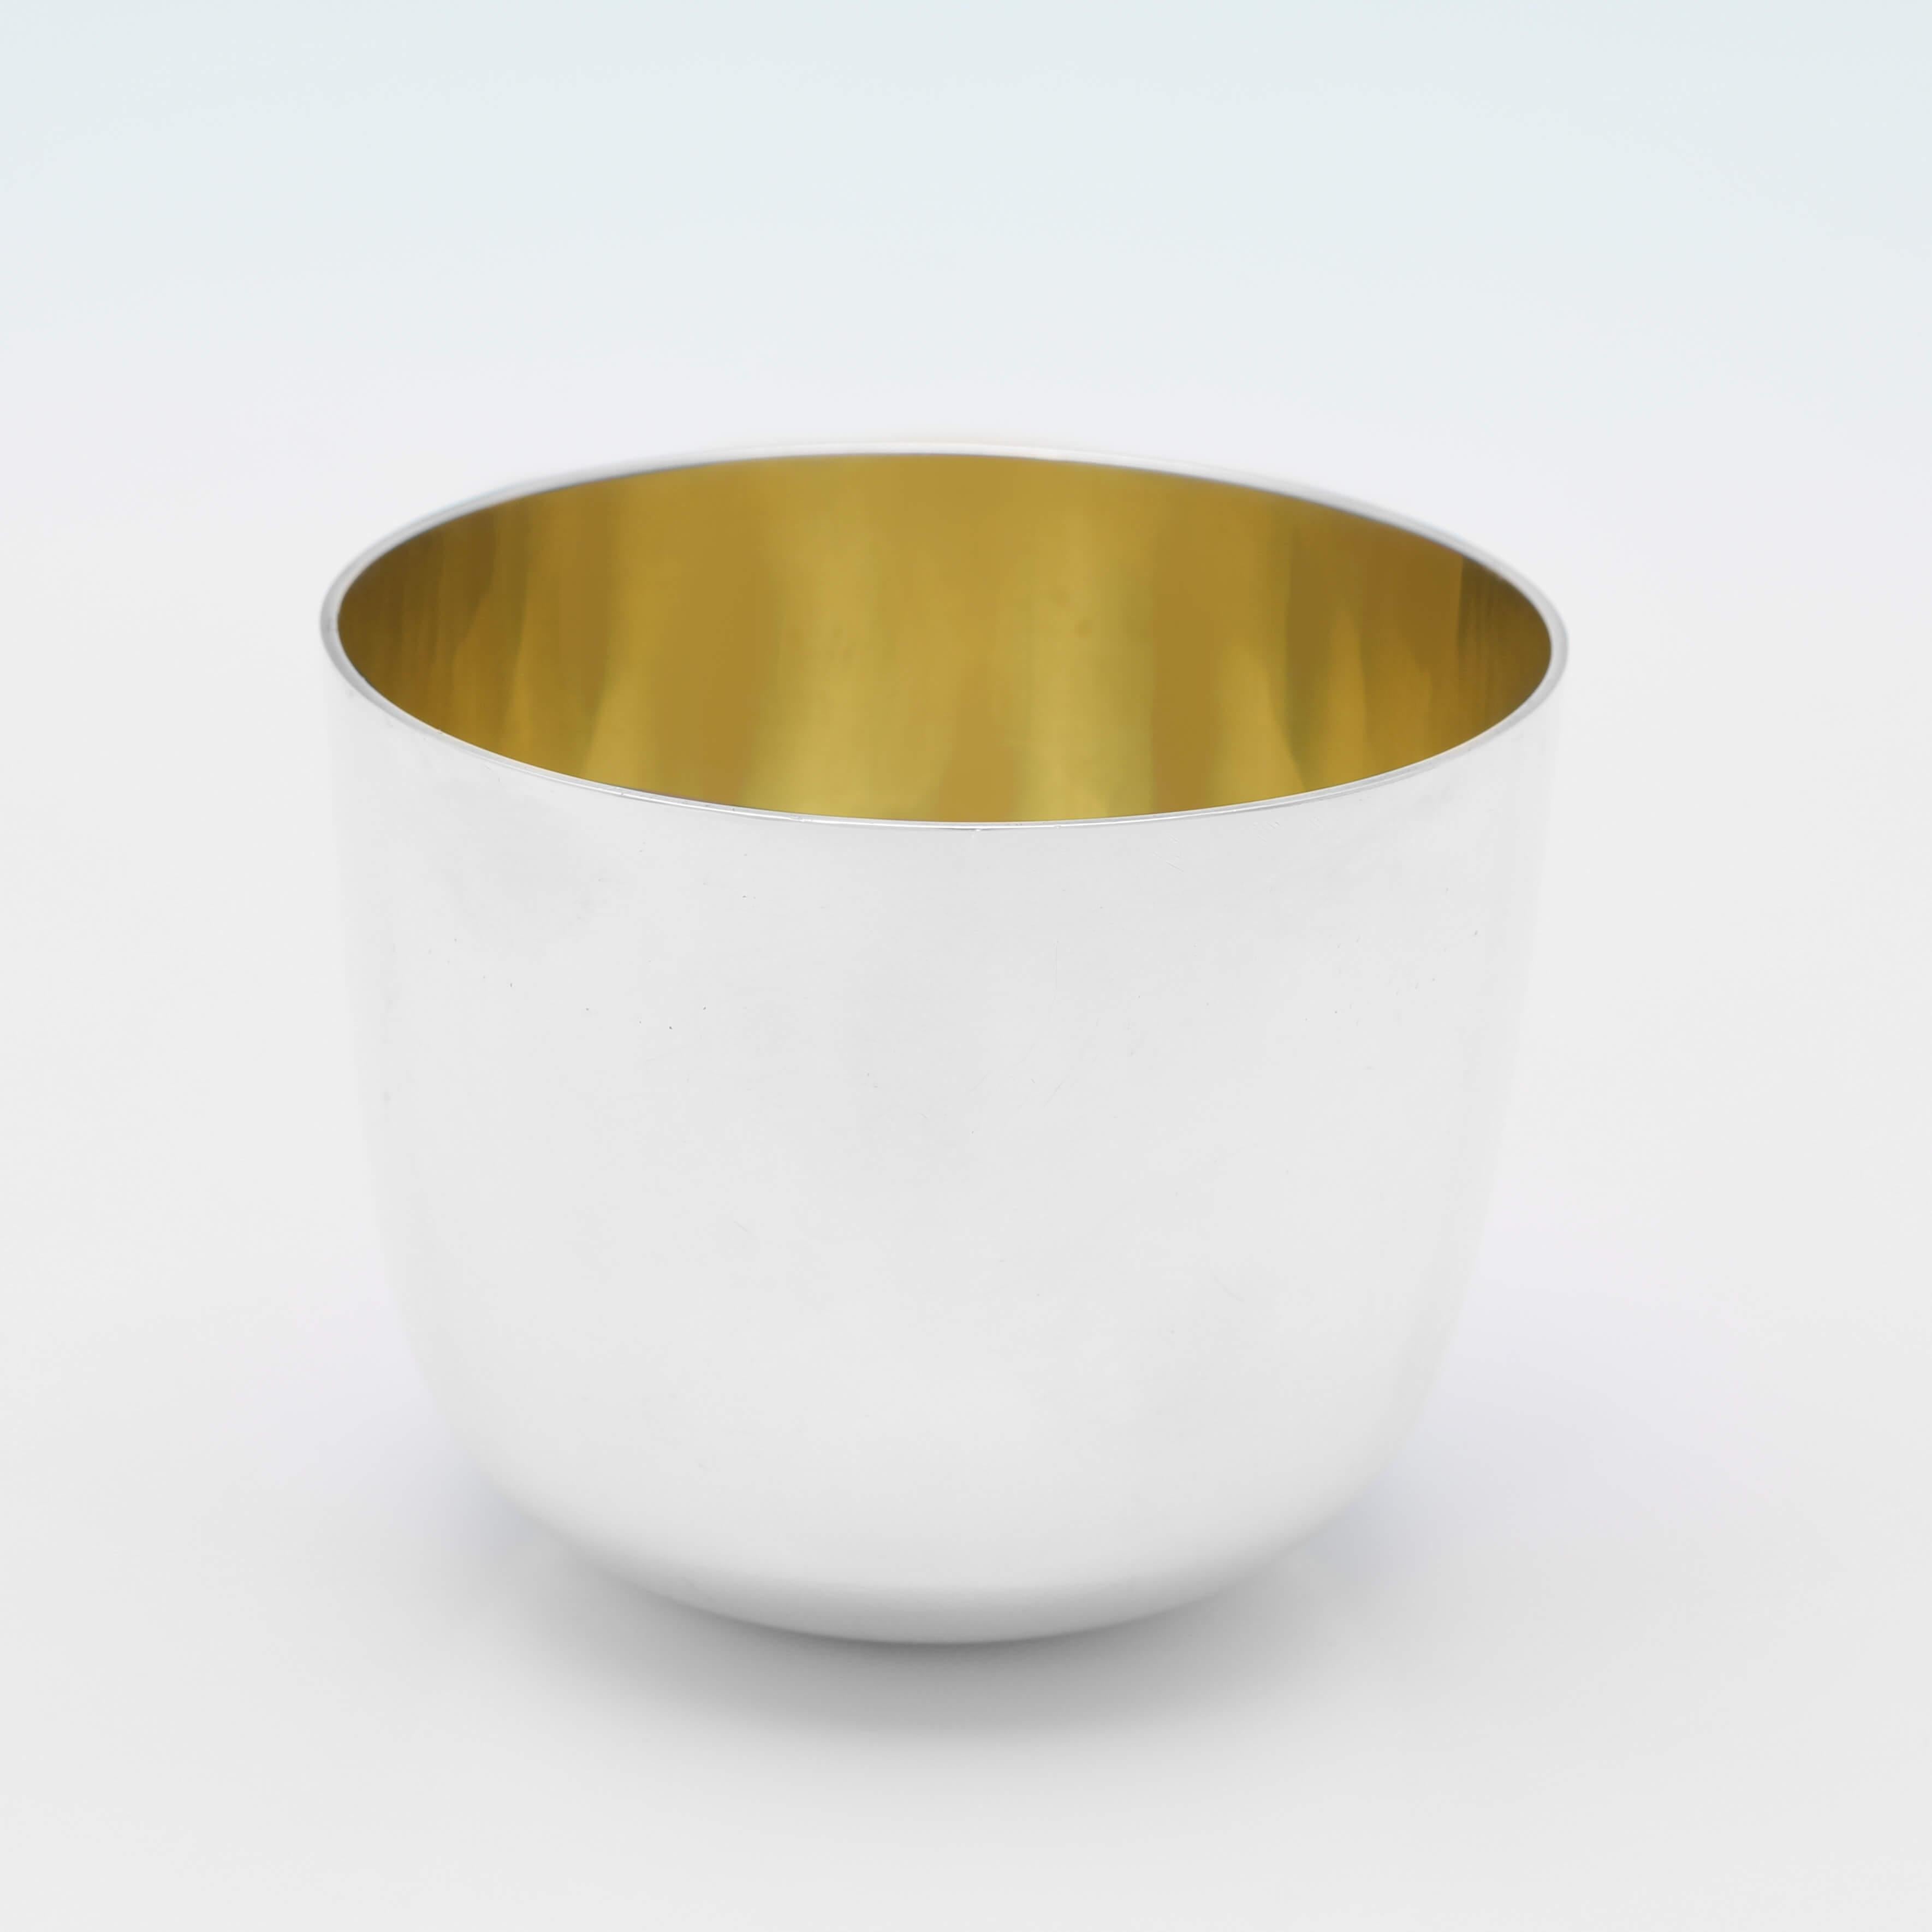 Hallmarked in London in 1988 by C. J. Vander, this handsome, Sterling Silver Tumbler Cup, is of traditional form and features a gilt interior. 

The tumbler cup measures 2.5